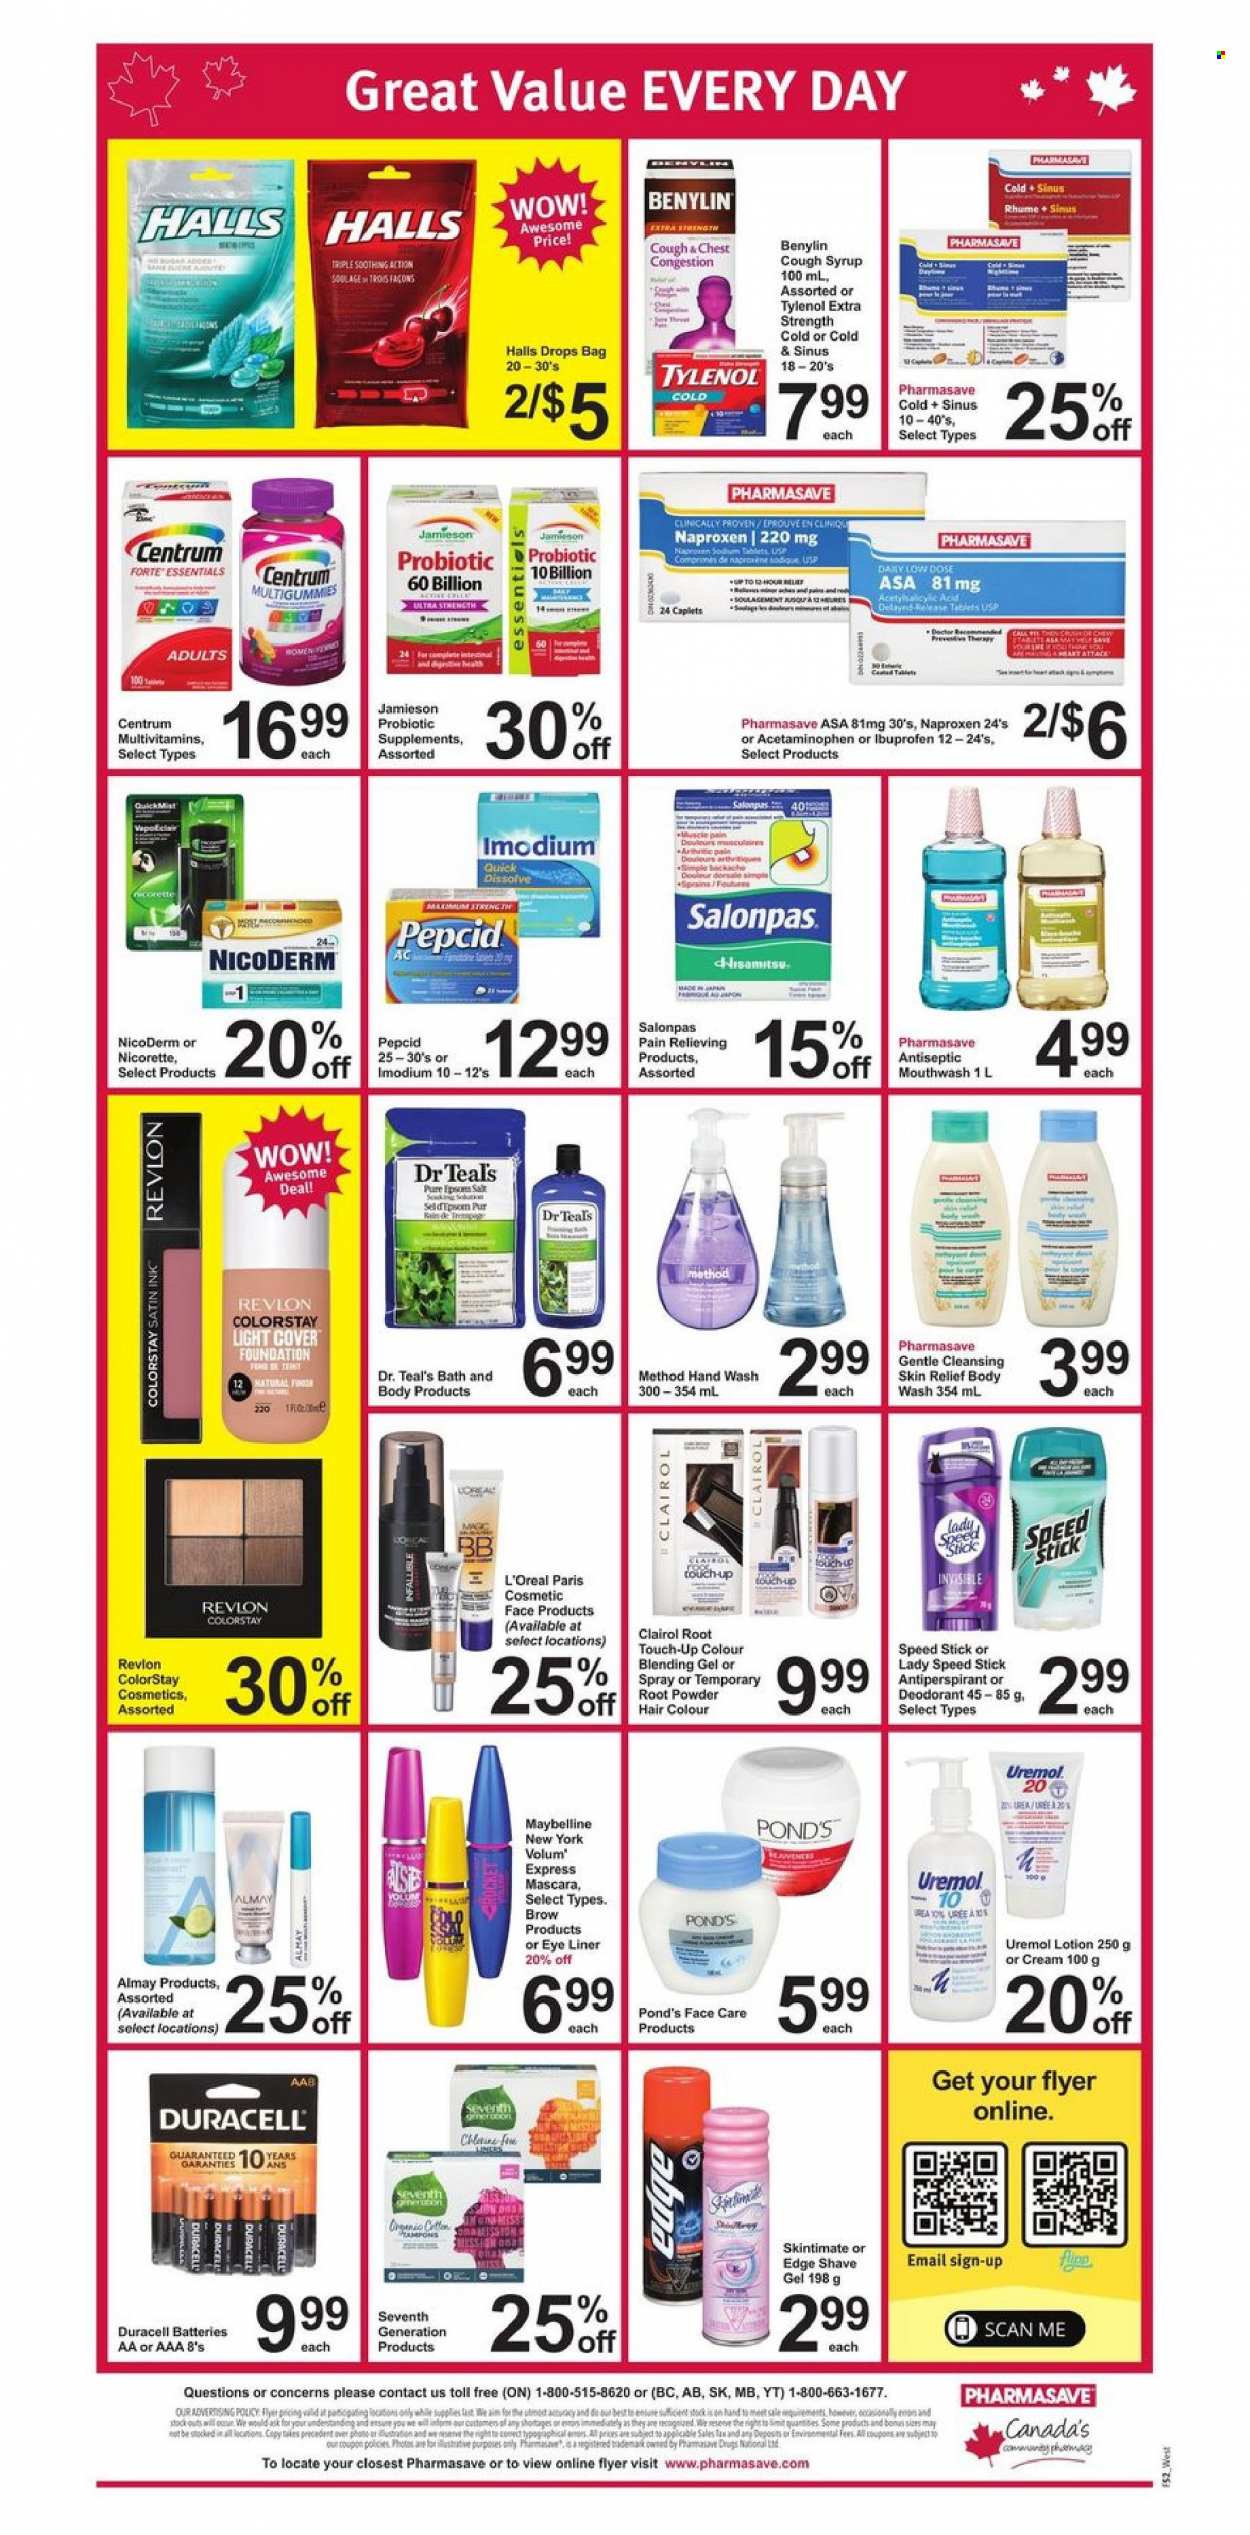 thumbnail - Pharmasave Flyer - December 24, 2021 - January 06, 2022 - Sales products - Halls, salt, syrup, L'Or, Jameson, body wash, hand wash, POND'S, mouthwash, Almay, L’Oréal, Root Touch-Up, Clairol, Revlon, body lotion, anti-perspirant, Speed Stick, shave gel, bag, mascara, eyeliner, battery, Duracell, multivitamin, NicoDerm, Nicorette, Tylenol, Ibuprofen, Pepcid, Centrum, Benylin, Maybelline, Imodium, deodorant. Page 2.